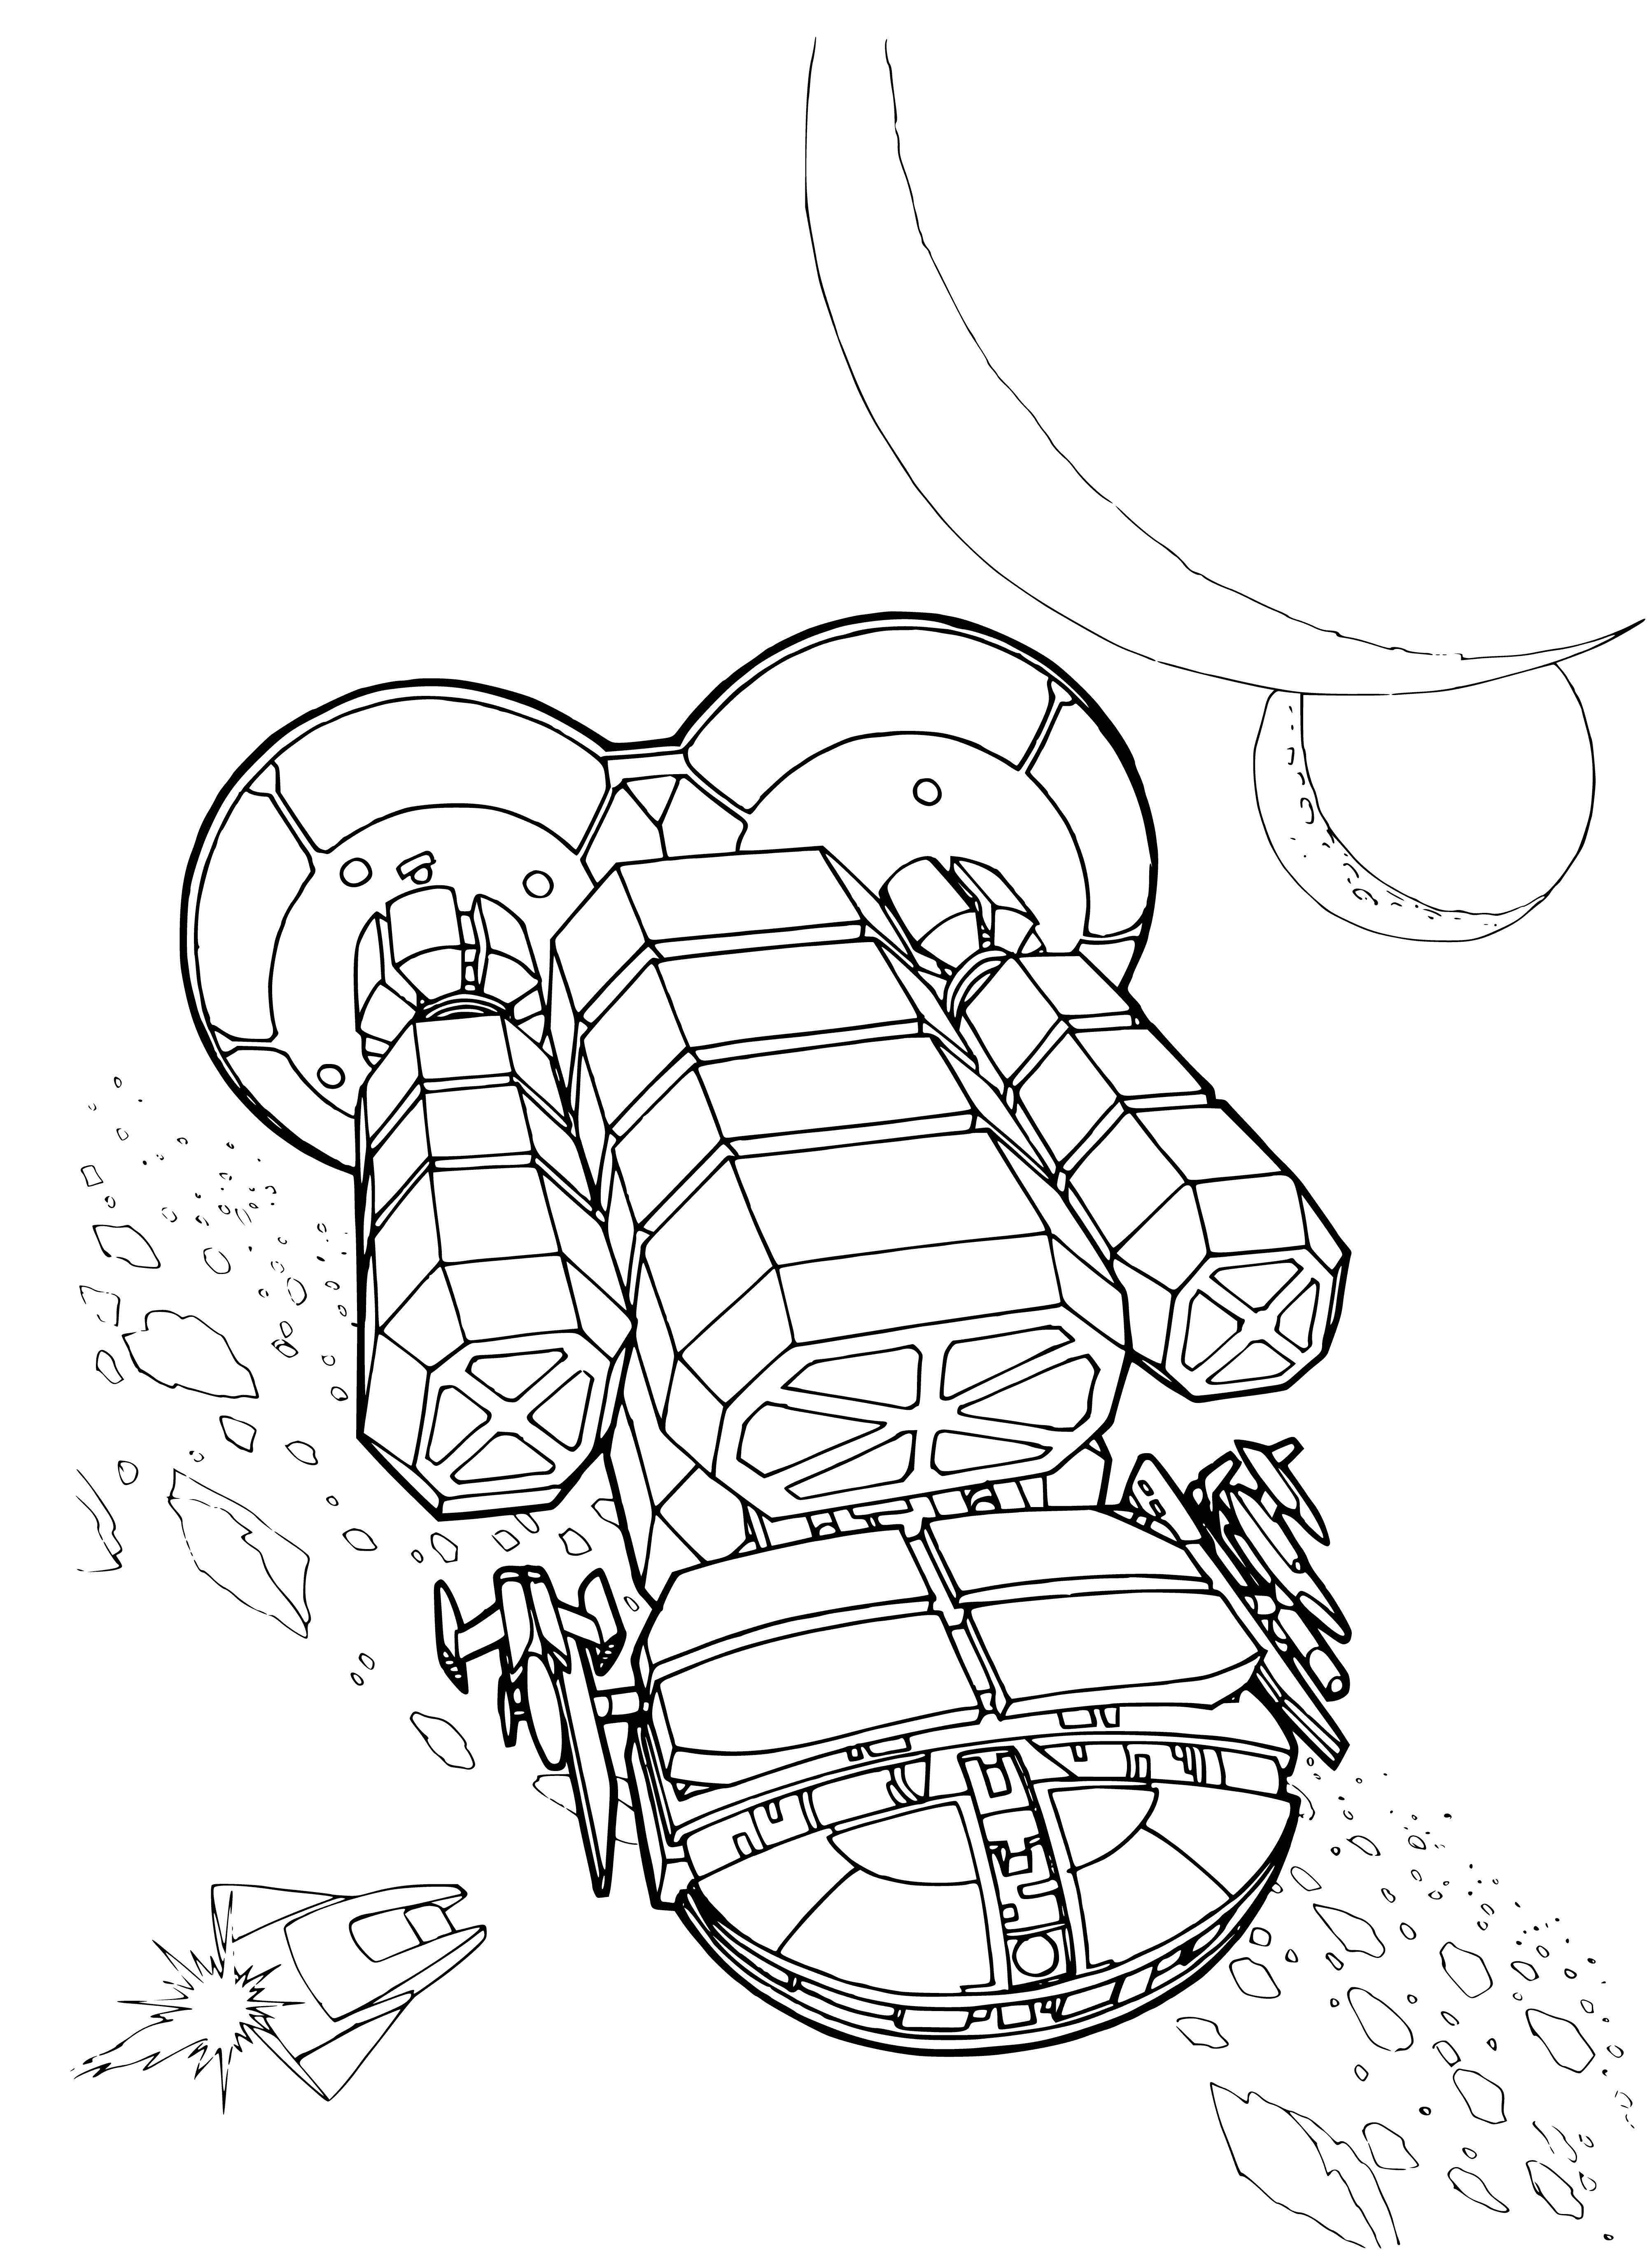 coloring page: Spaceship taking off among stars in deep black background - a coloring page to explore creativity!